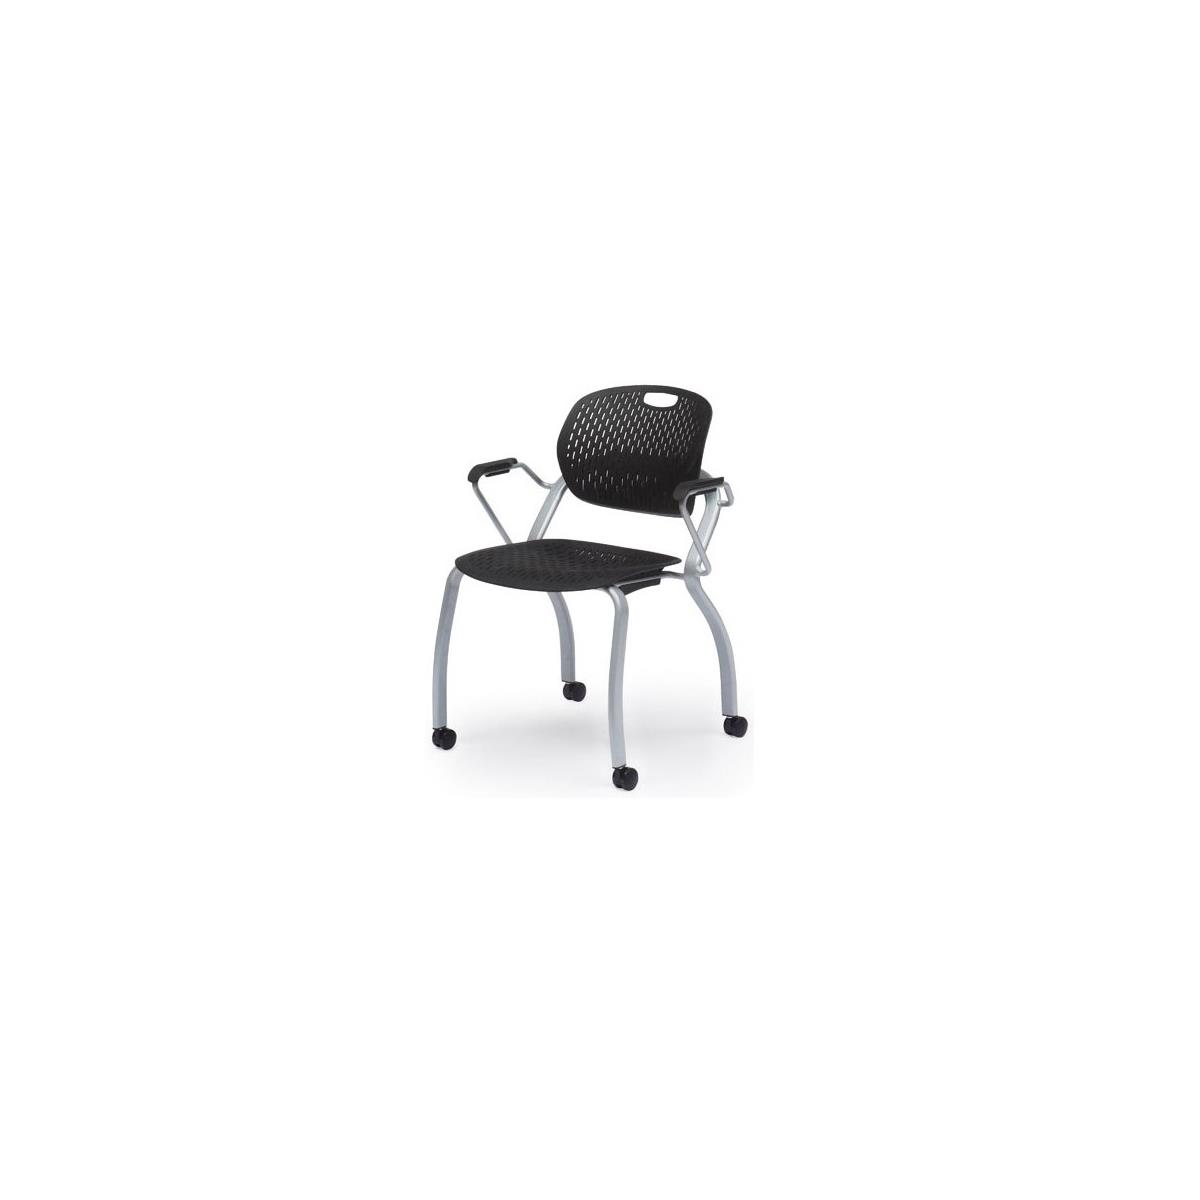 Image of Bretford Student Arm Chair Stacking with Casters